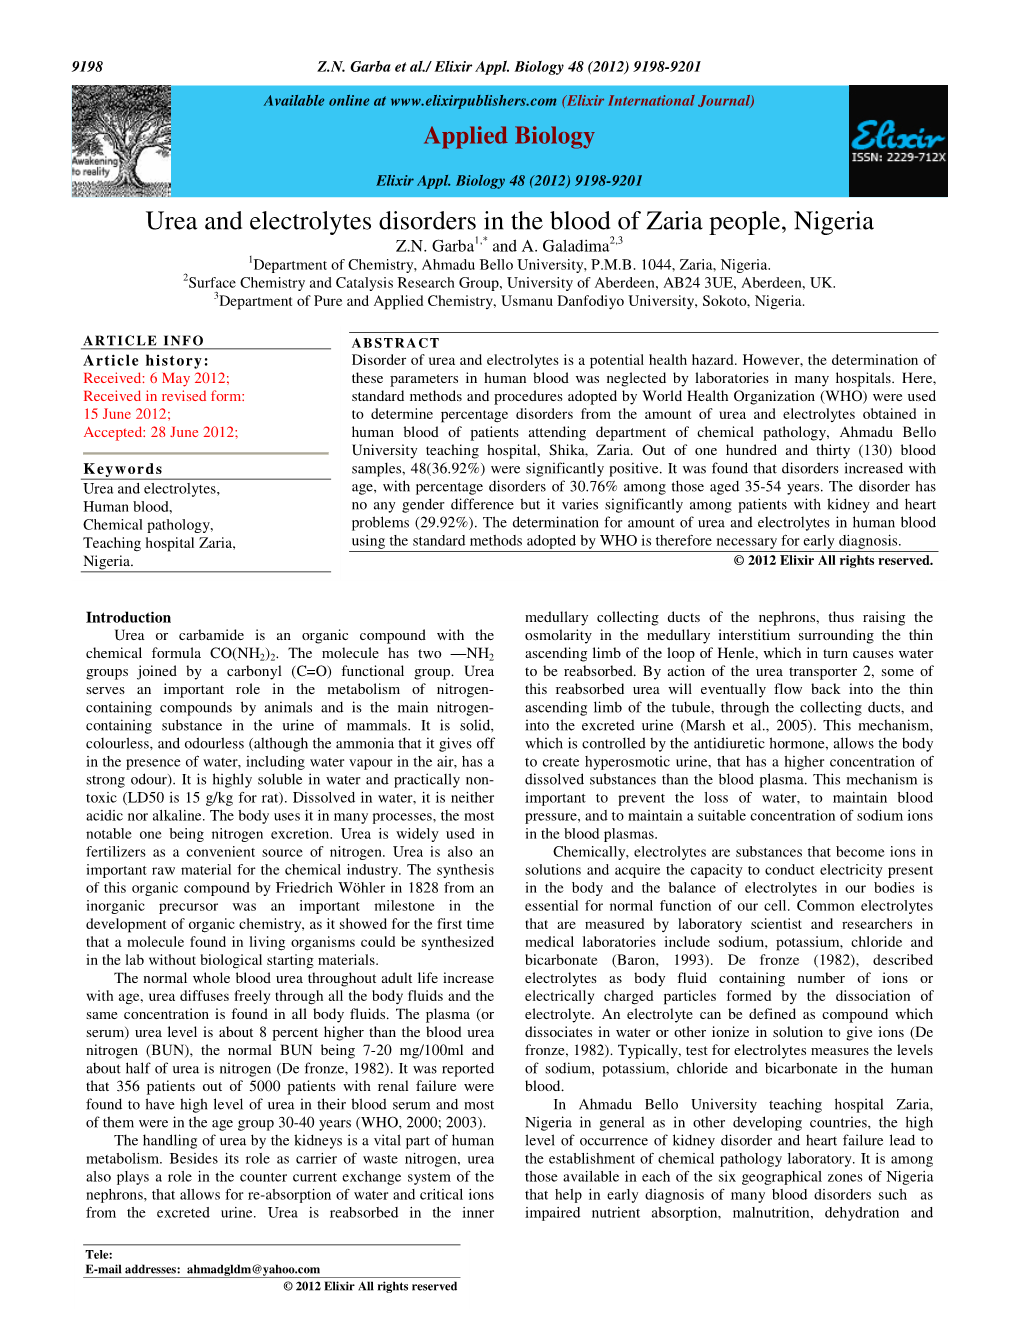 Urea and Electrolytes Disorders in the Blood of Zaria People, Nigeria Z.N